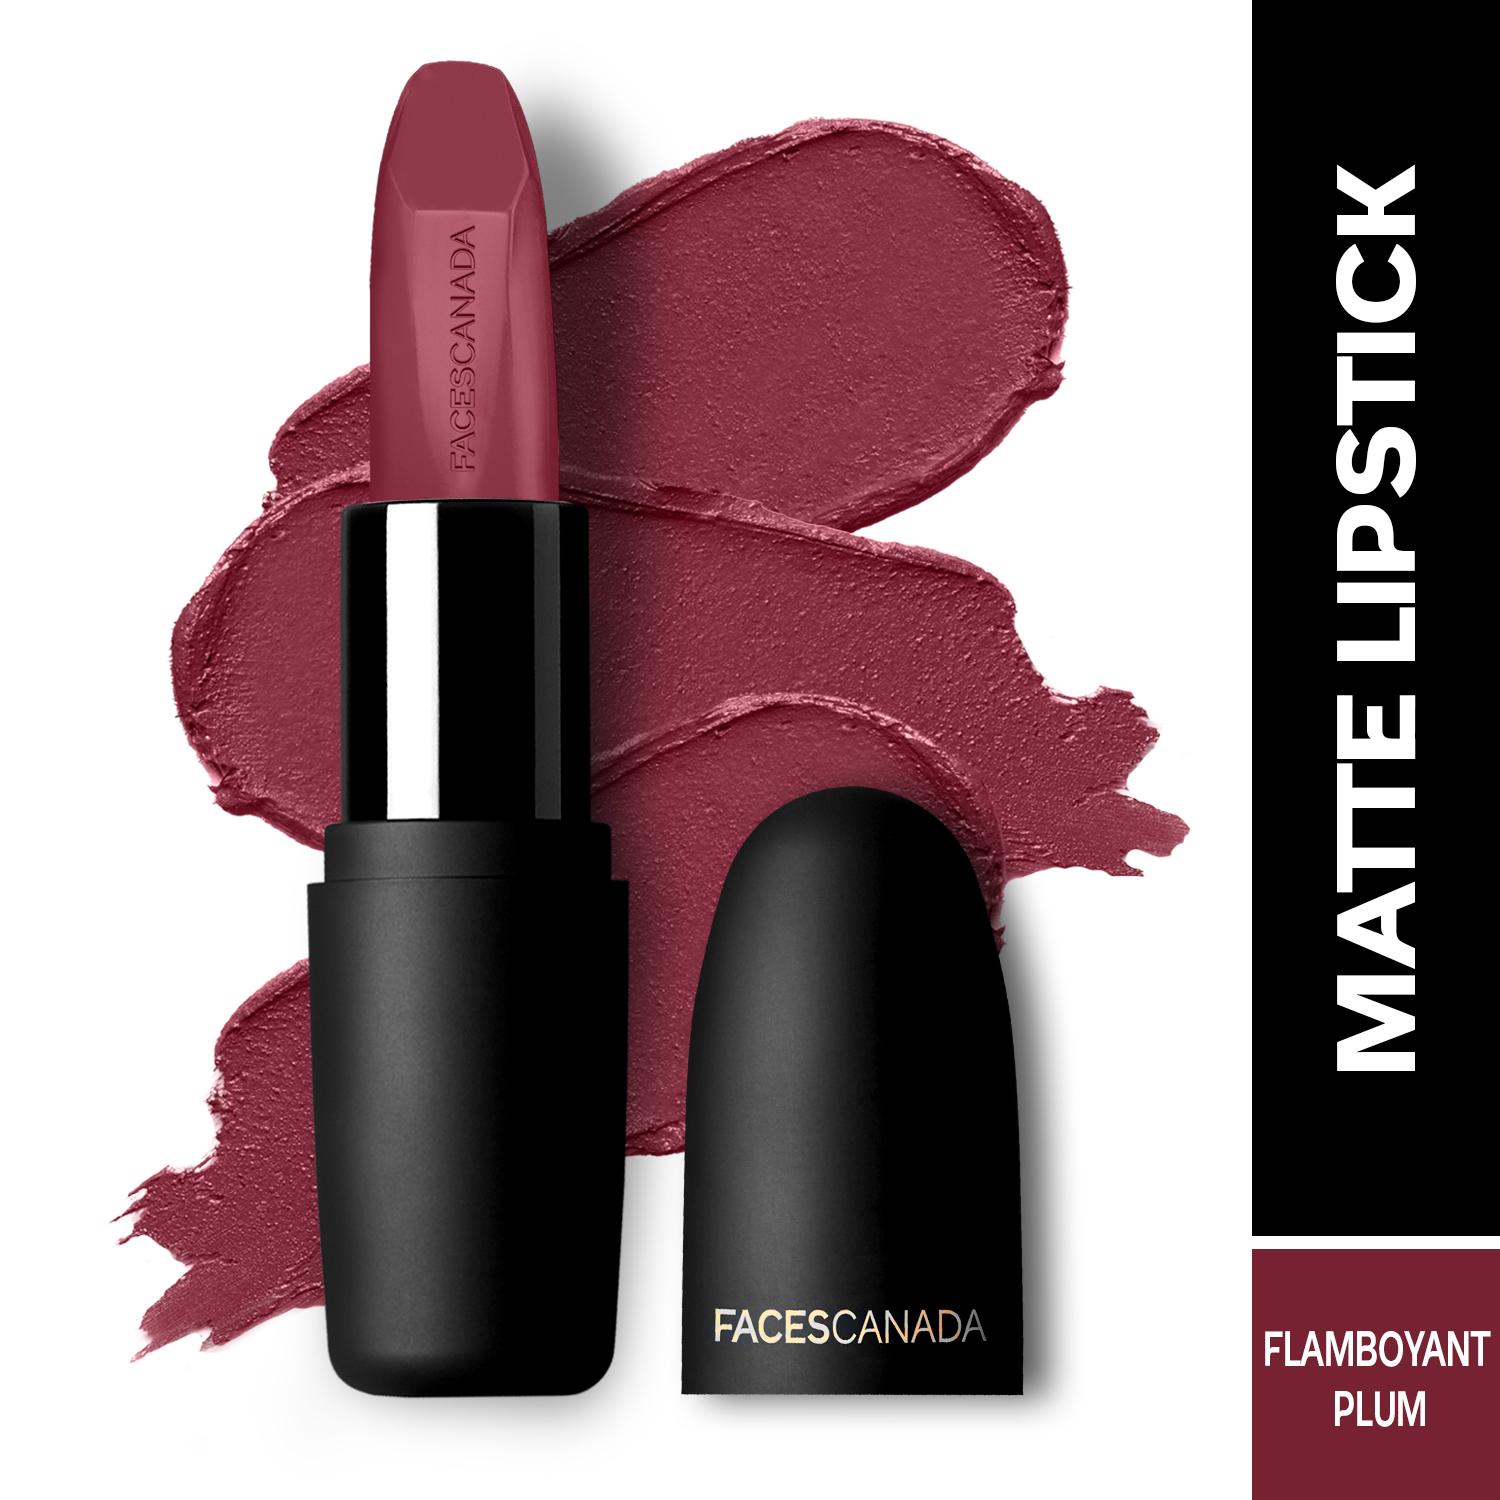 Faces Canada | Faces Canada Weightless Matte Lipstick, Pigmented and Hydrated Lips - Flamboyant Plum 12 (4.5 g)